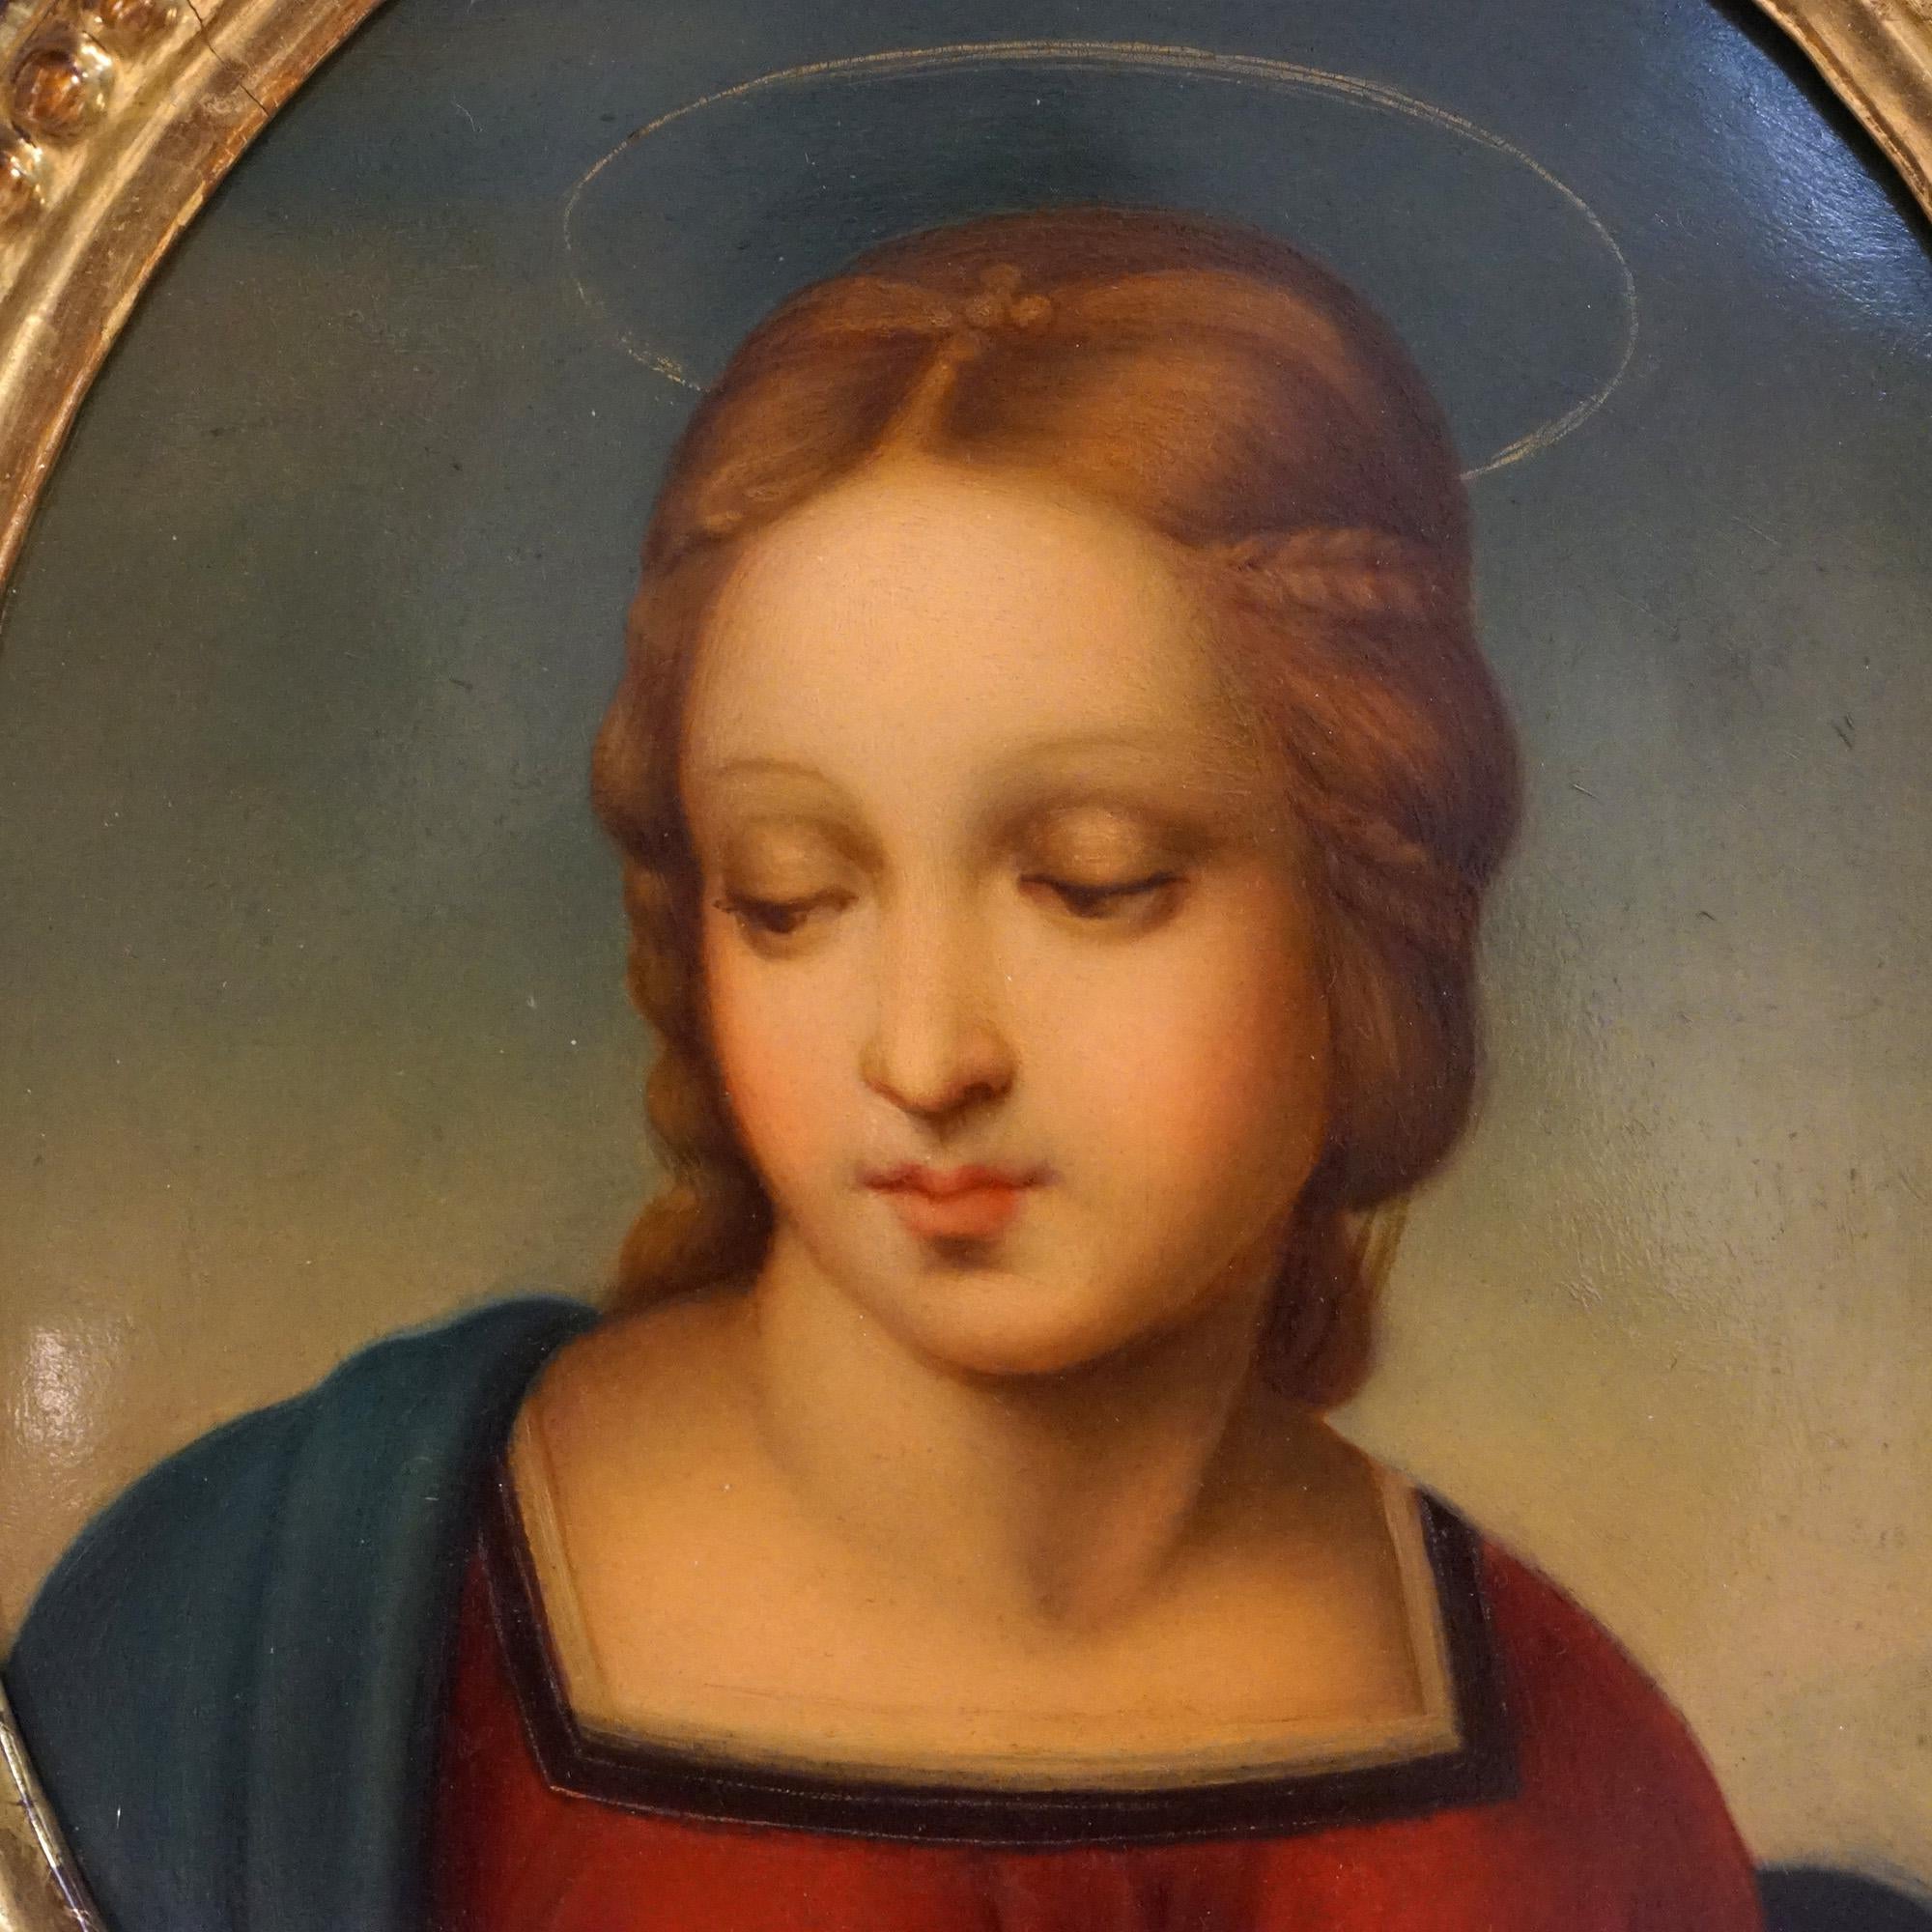 An antique KPM portrait painting on porcelain of Madonna Of The Goldfinch after Raphael of Florence, seated in carved Italian giltwood frame, 19th C

Measures - 19.5